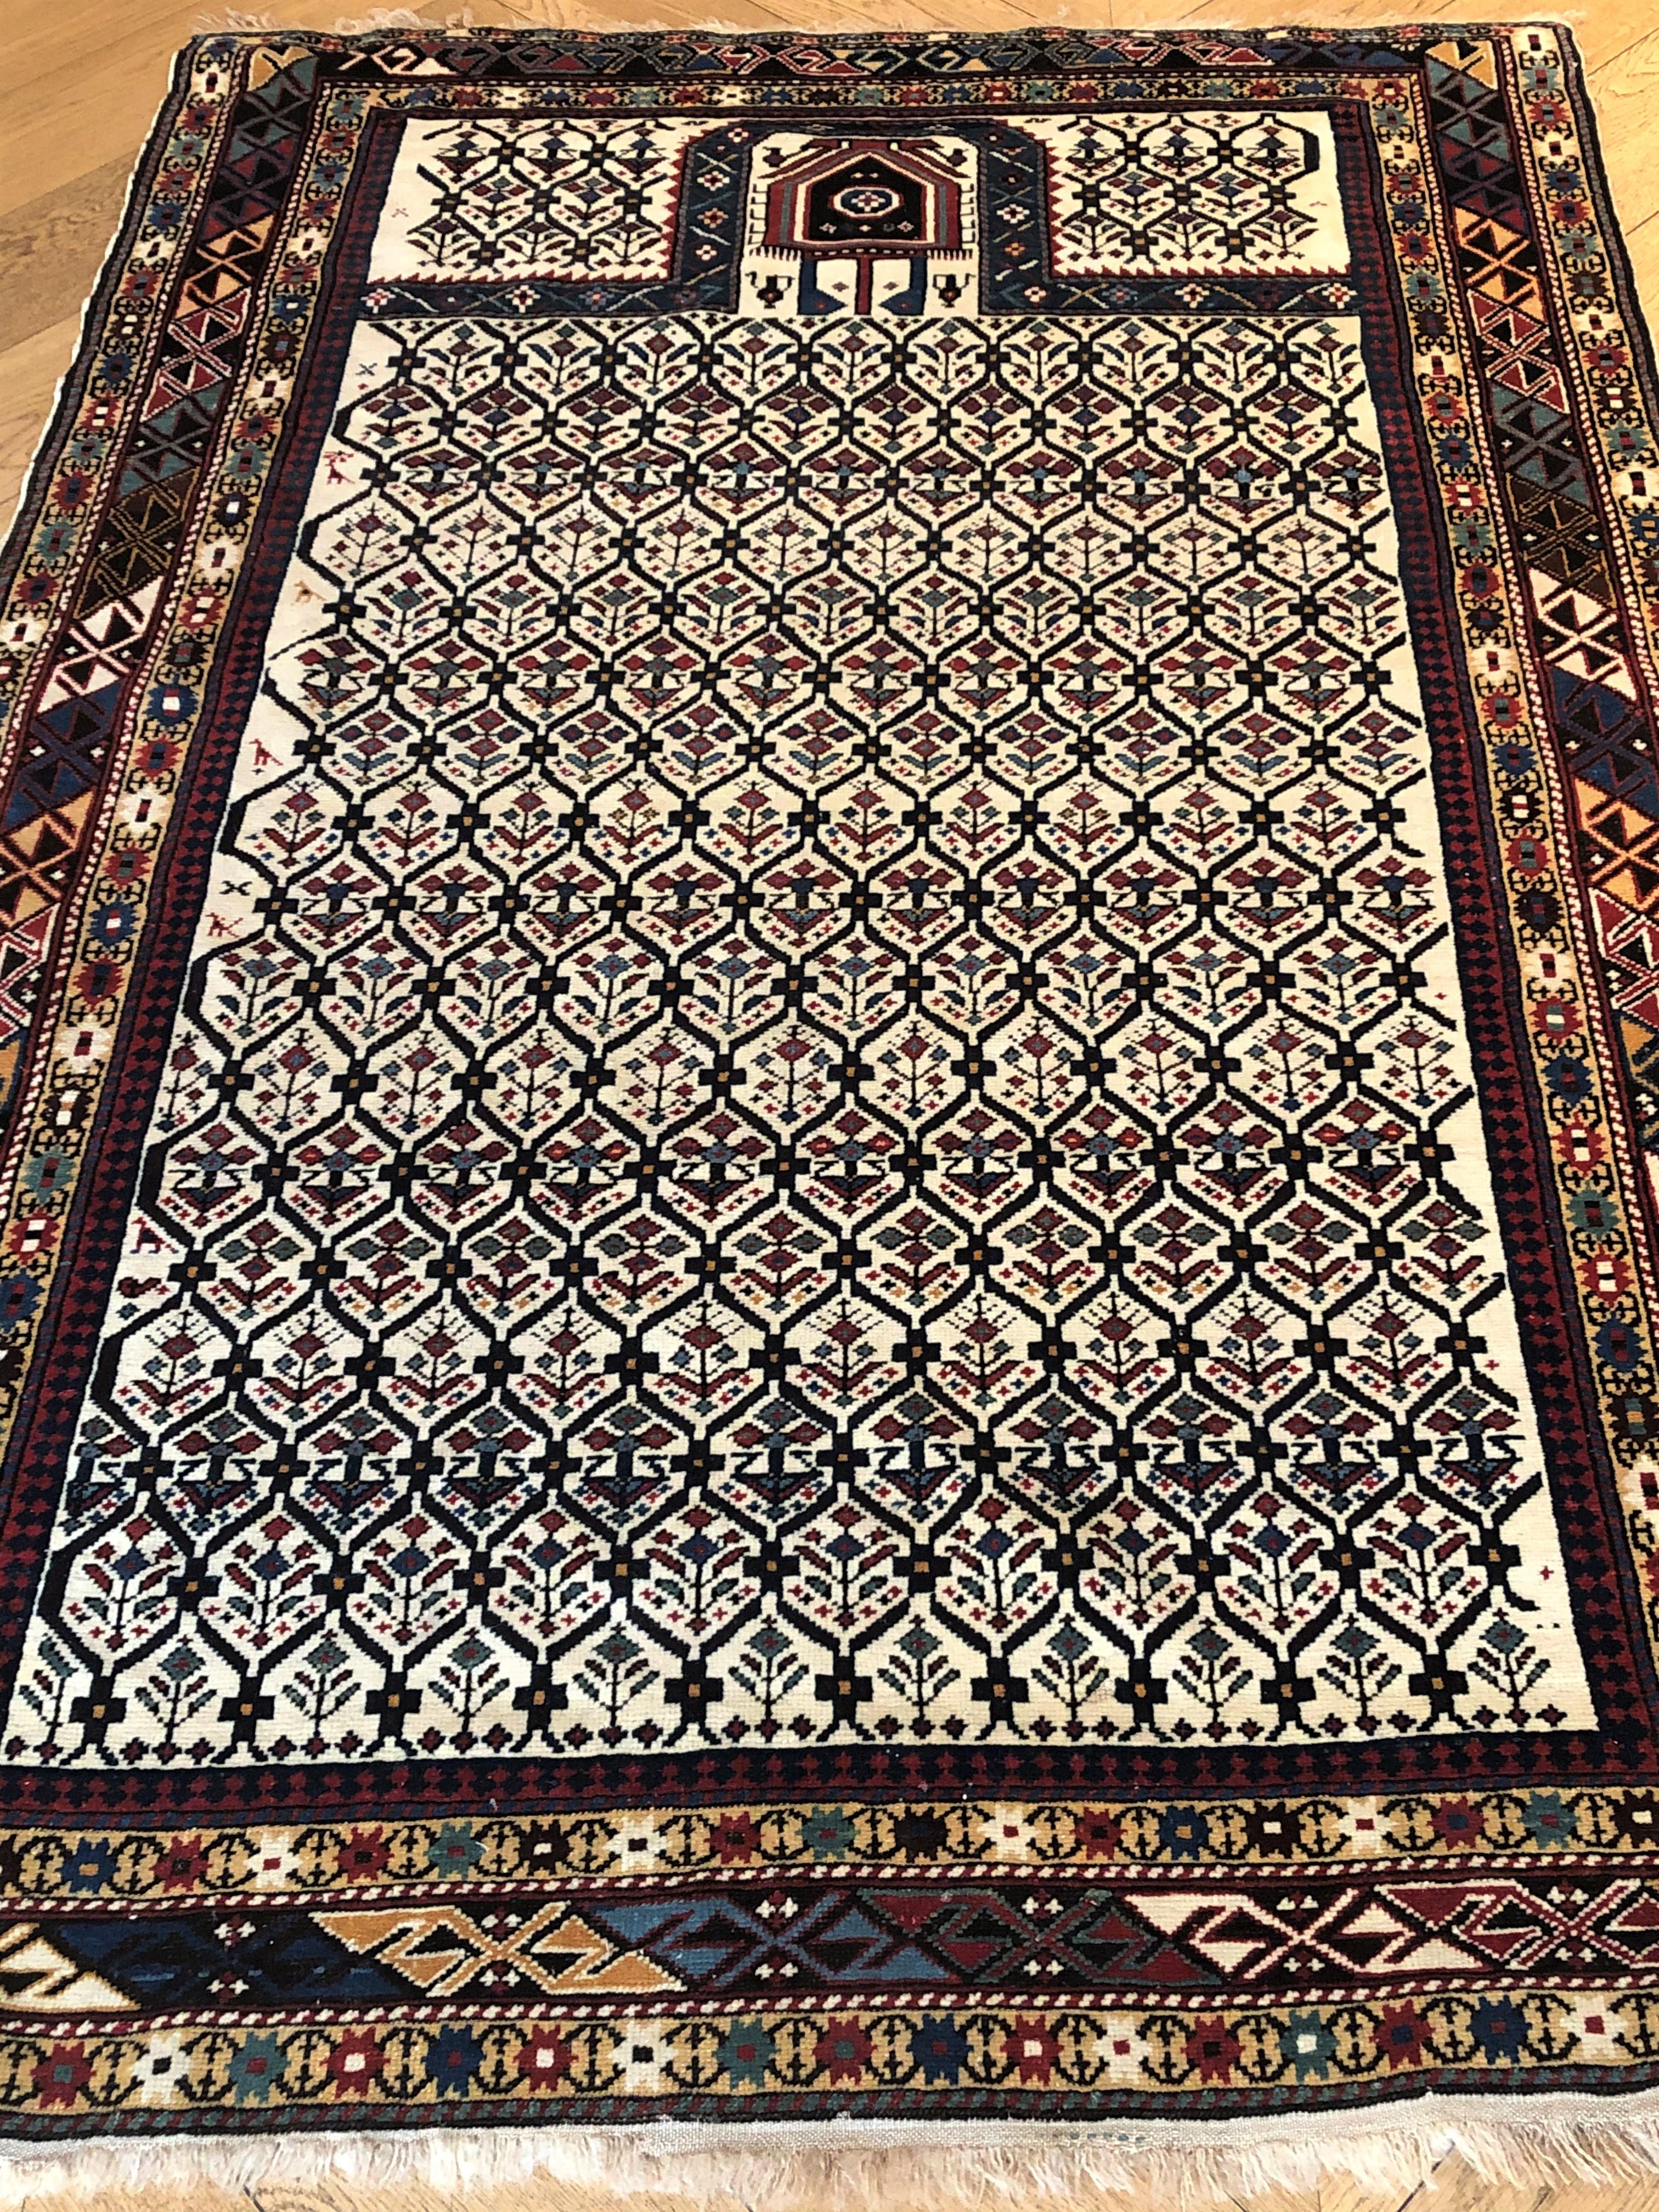 Here’s an antique prayer rug of Caucasian production from Dagestan. Dagestan means 